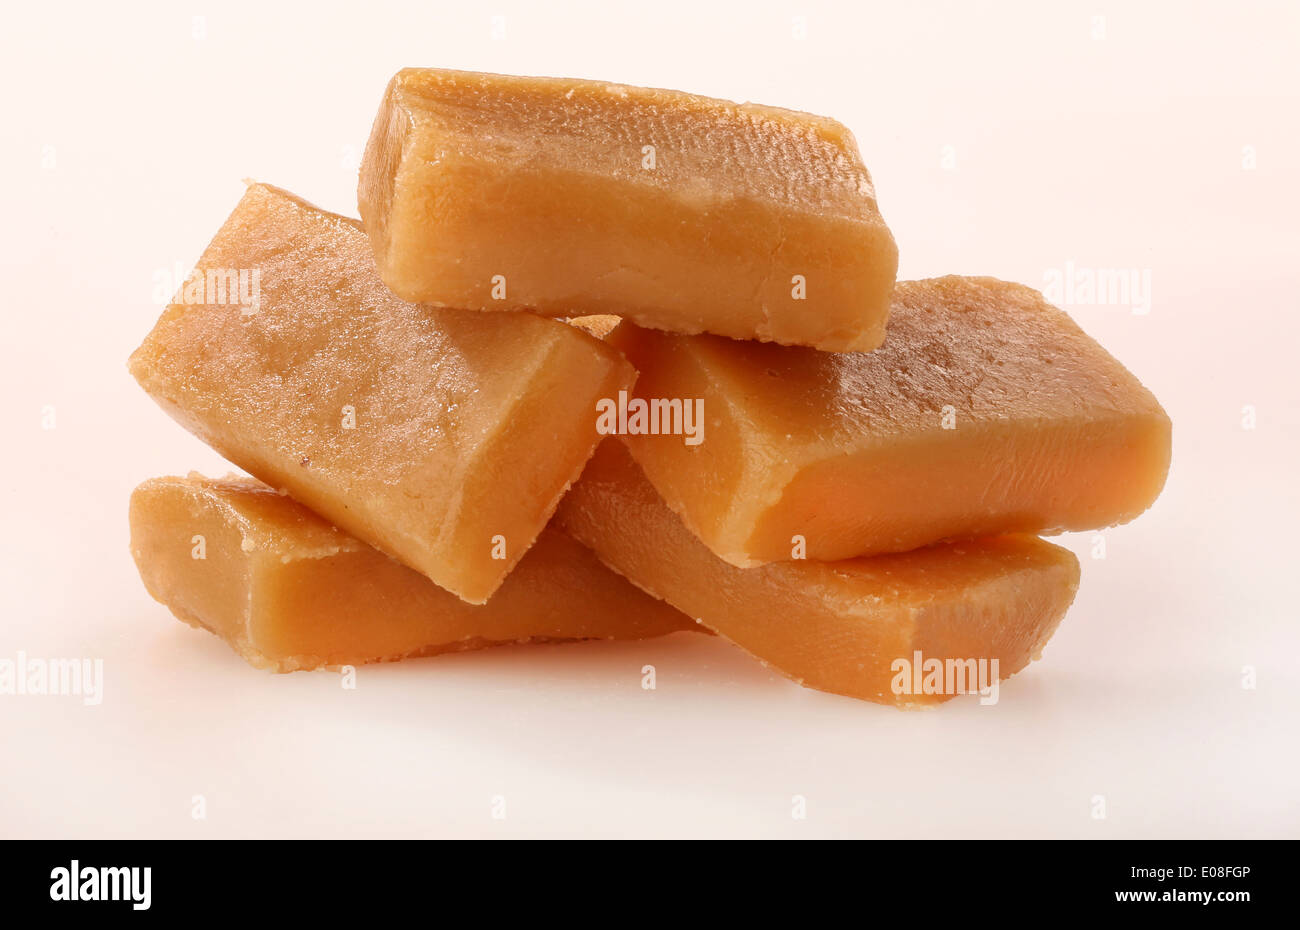 STACK OF TOFFEE PIECES Stock Photo